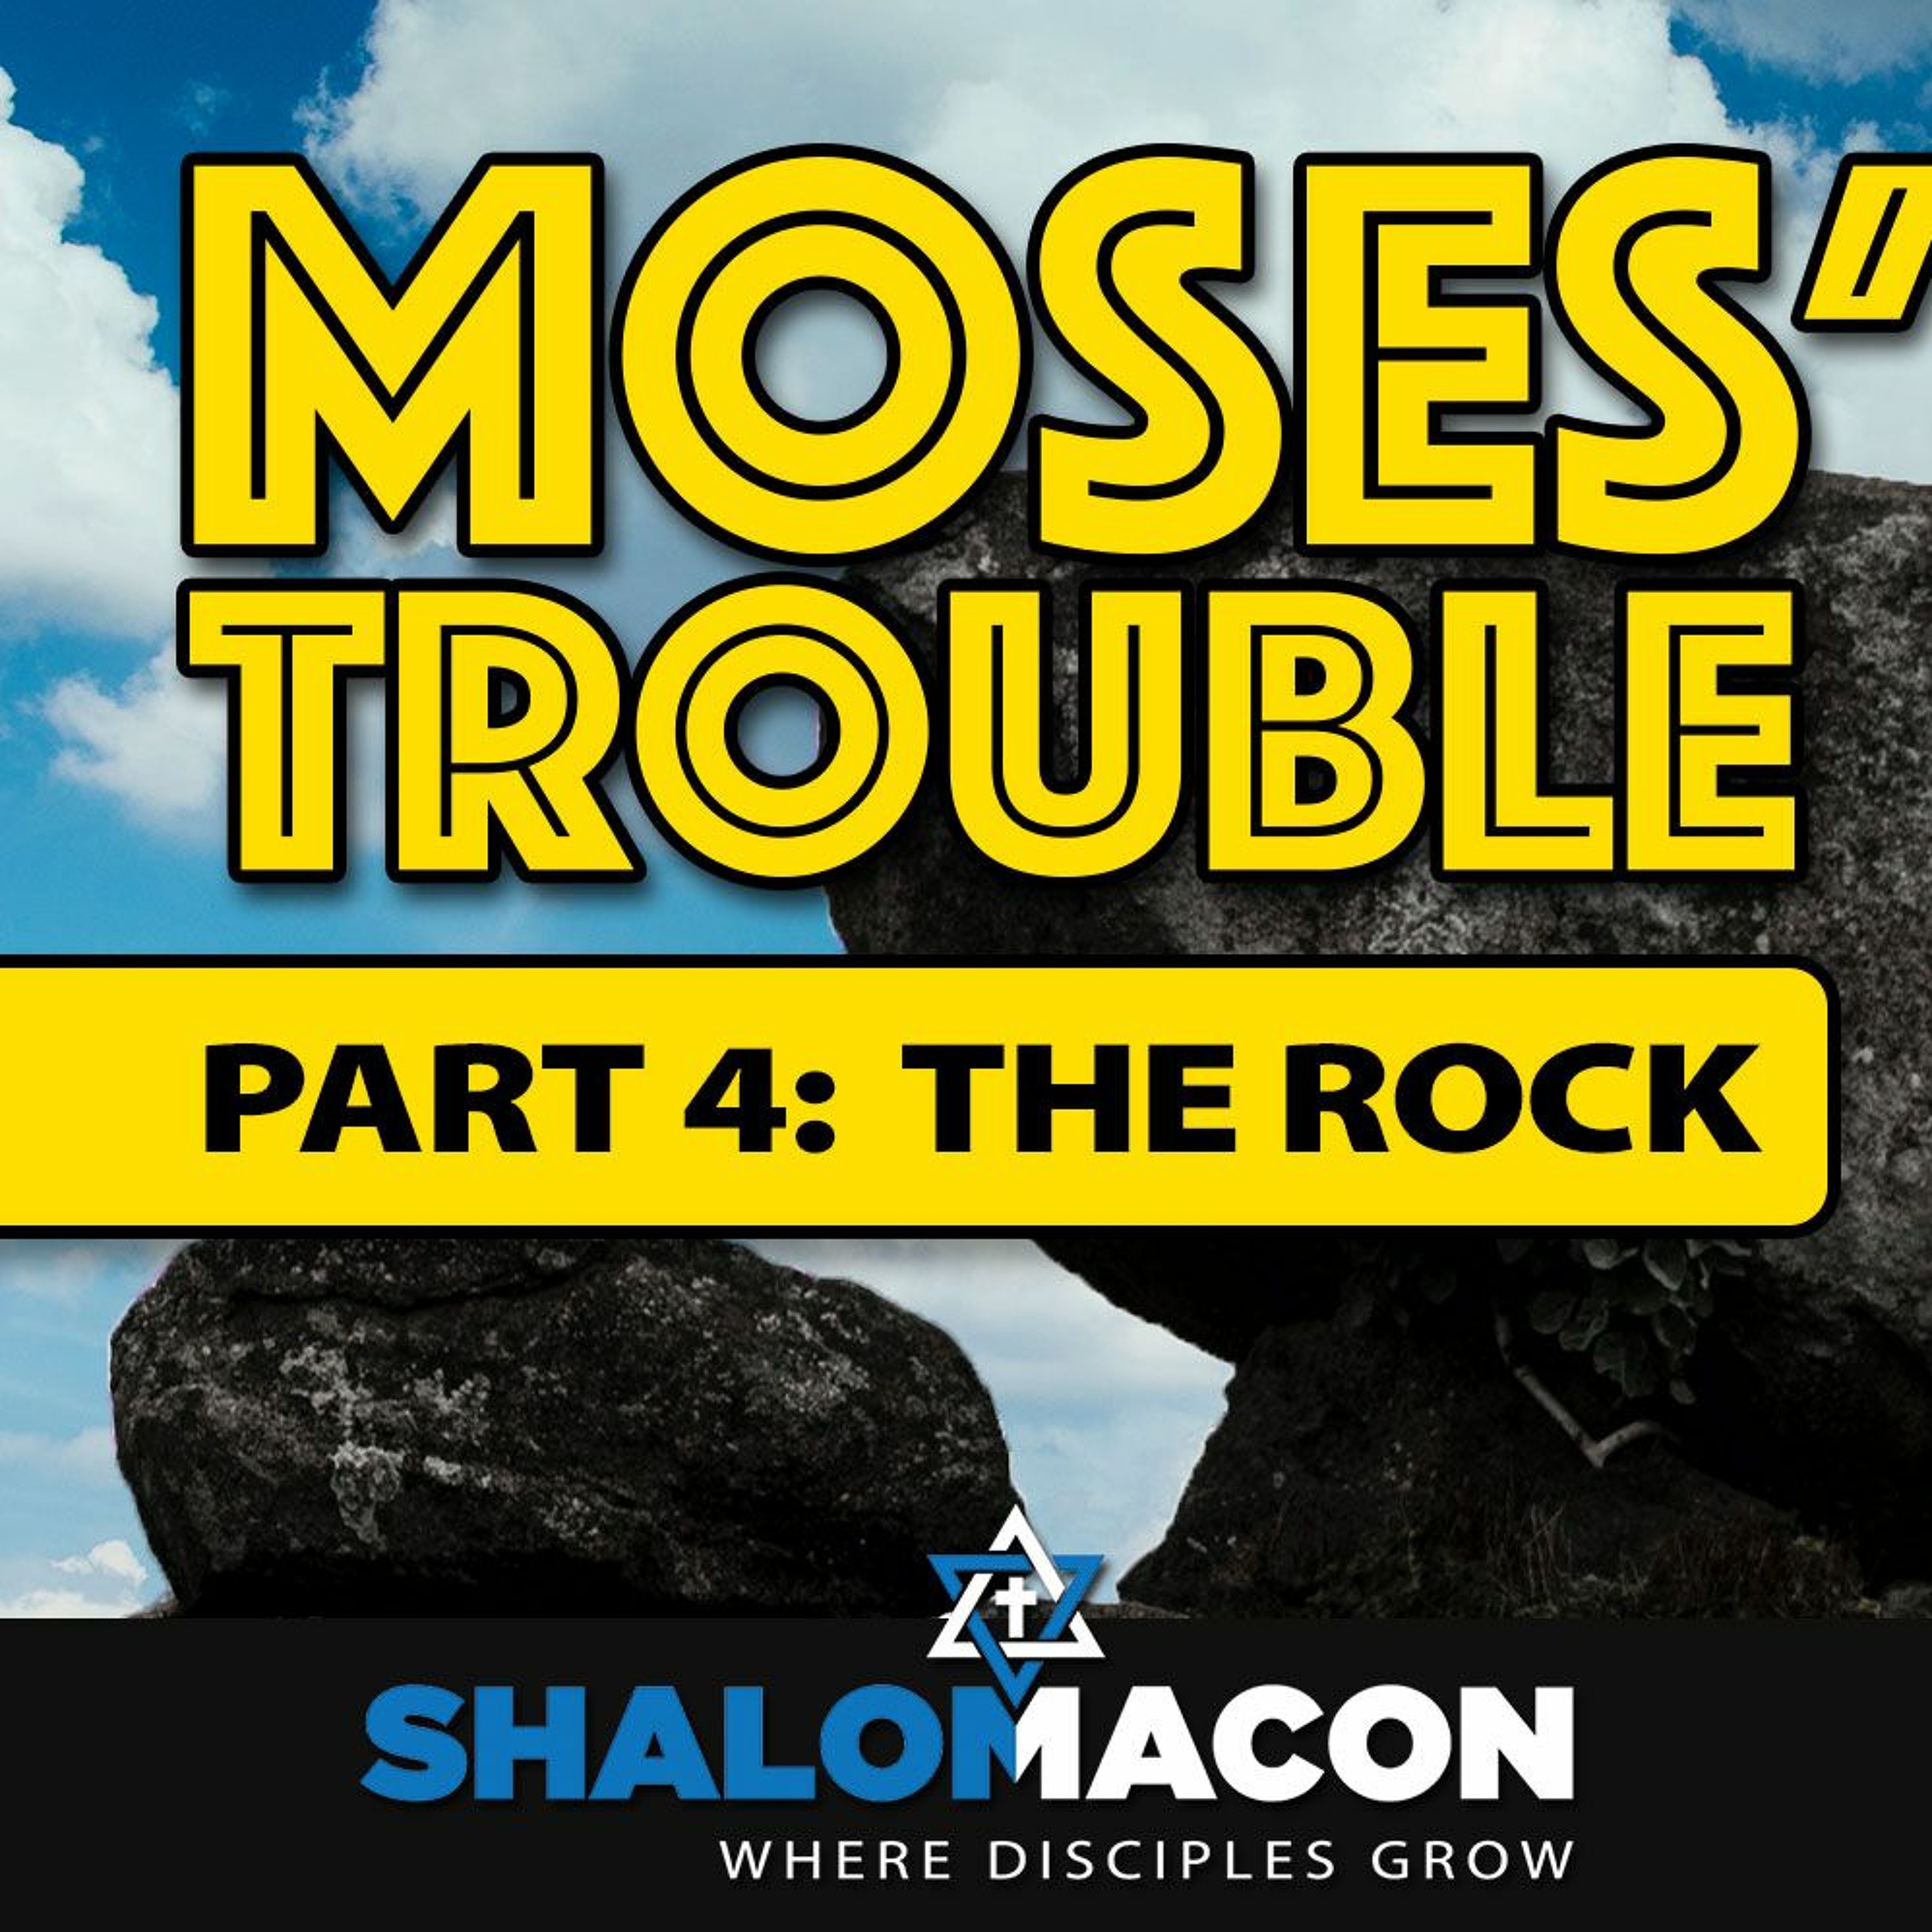 Moses' Trouble - Part 4: The Rock